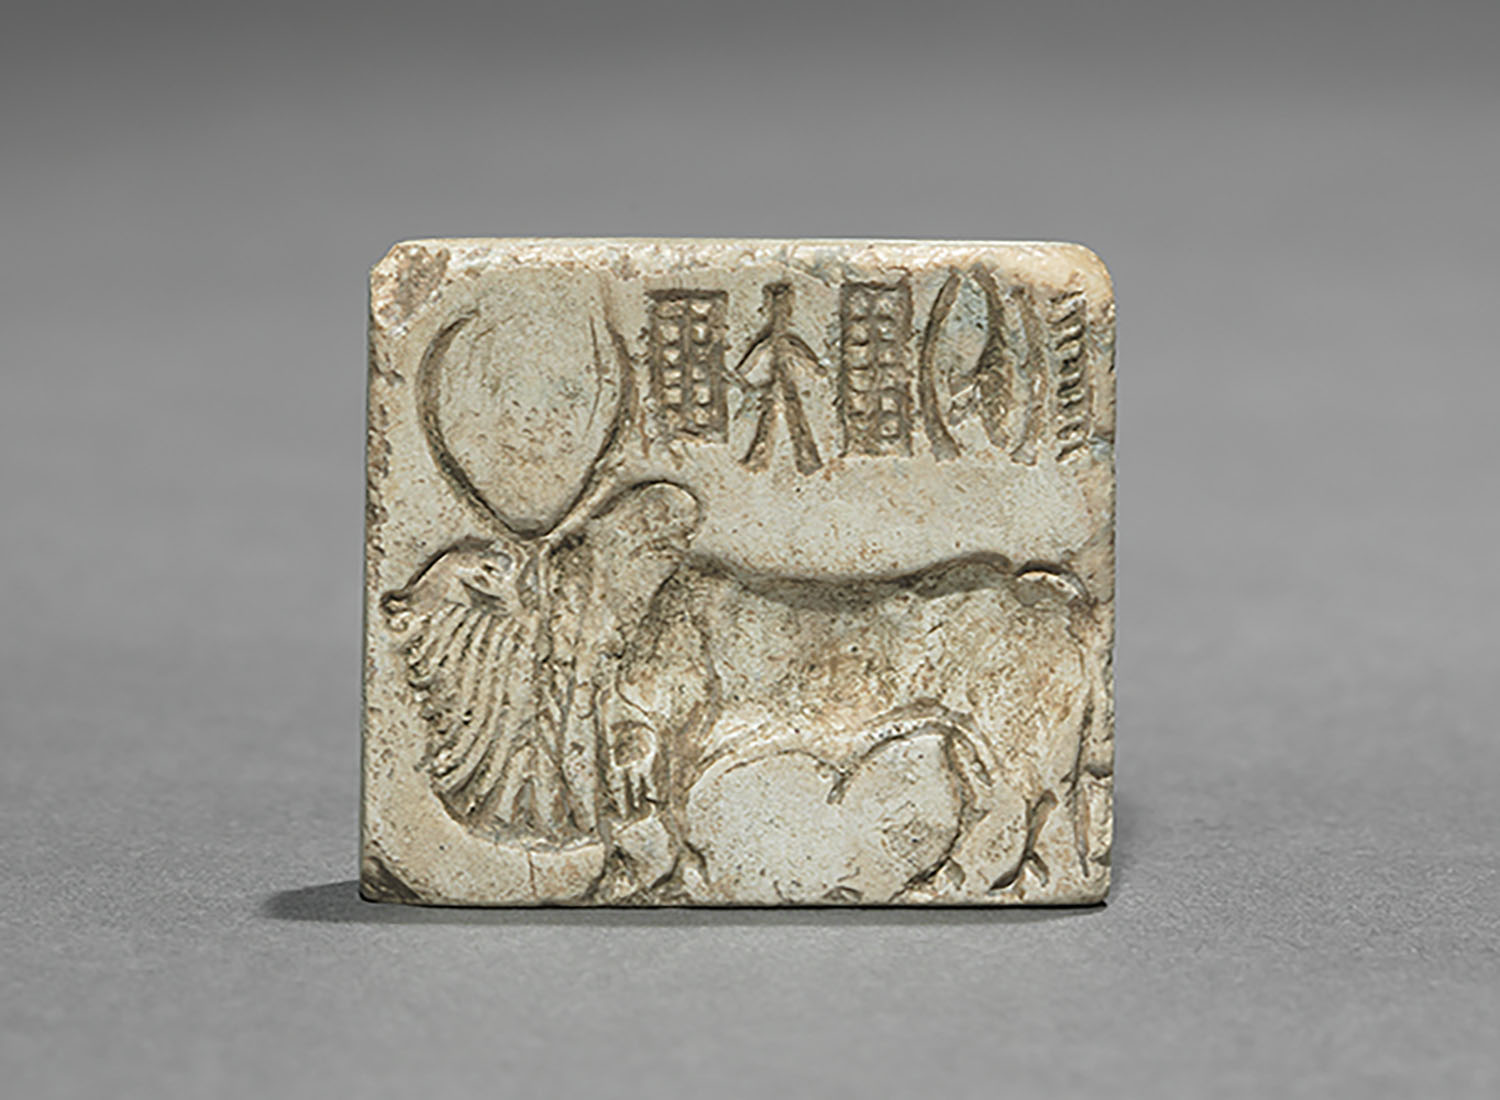 A steatite seal depicting a bull with two horns in the centre and an Indus inscription on the top.